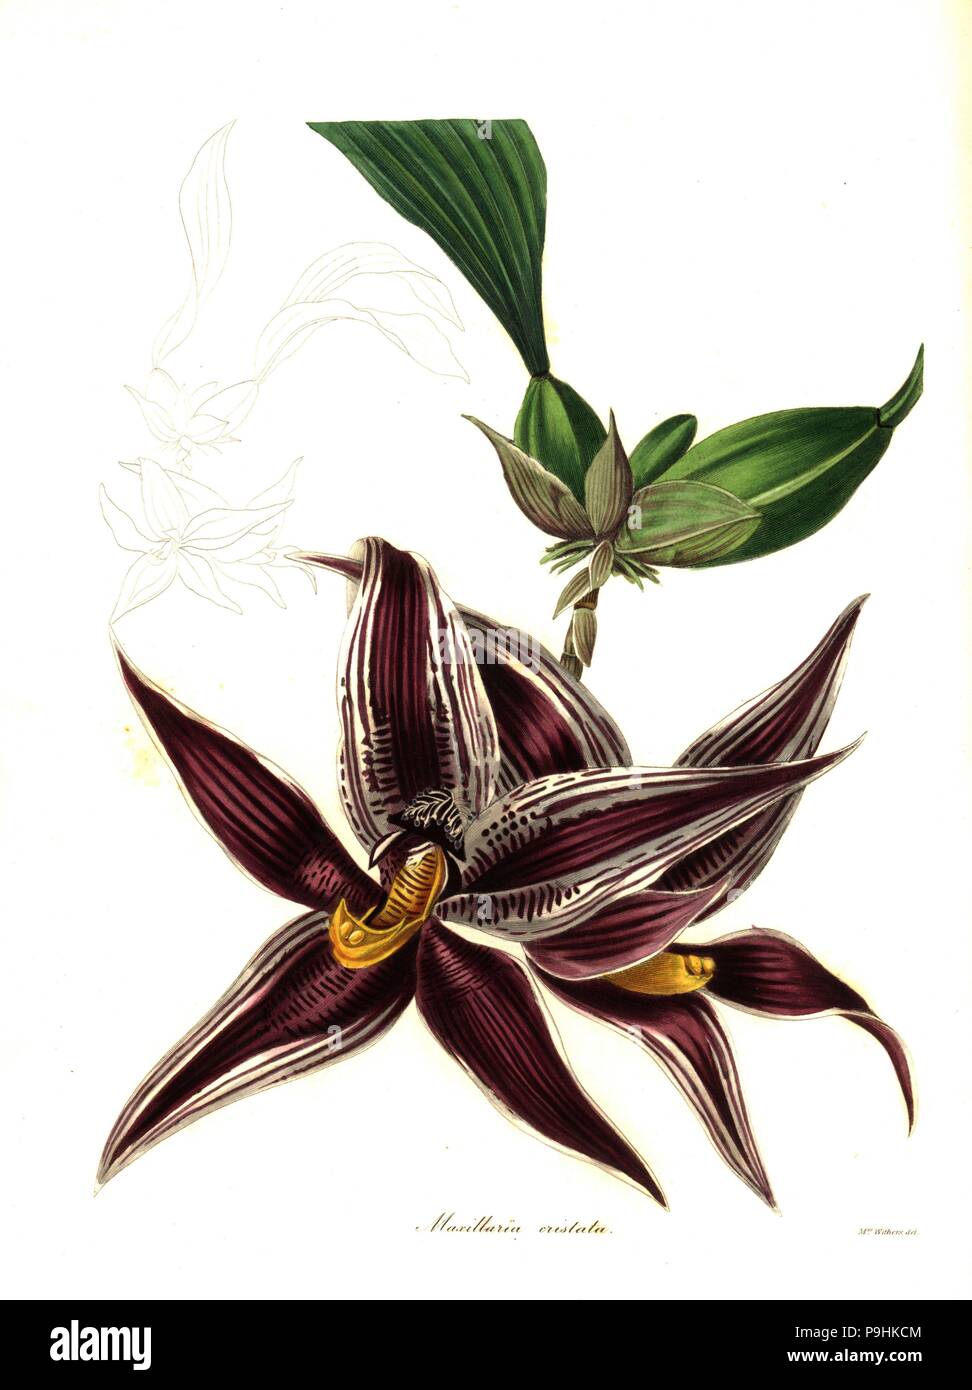 Paphinia cristata orchid (Crested maxillaria, Maxillaria cristata). Handcoloured copperplate engraving after a botanical illustration by Mrs Augusta Withers from Benjamin Maund and the Rev. John Stevens Henslow's The Botanist, London, 1836. Stock Photo